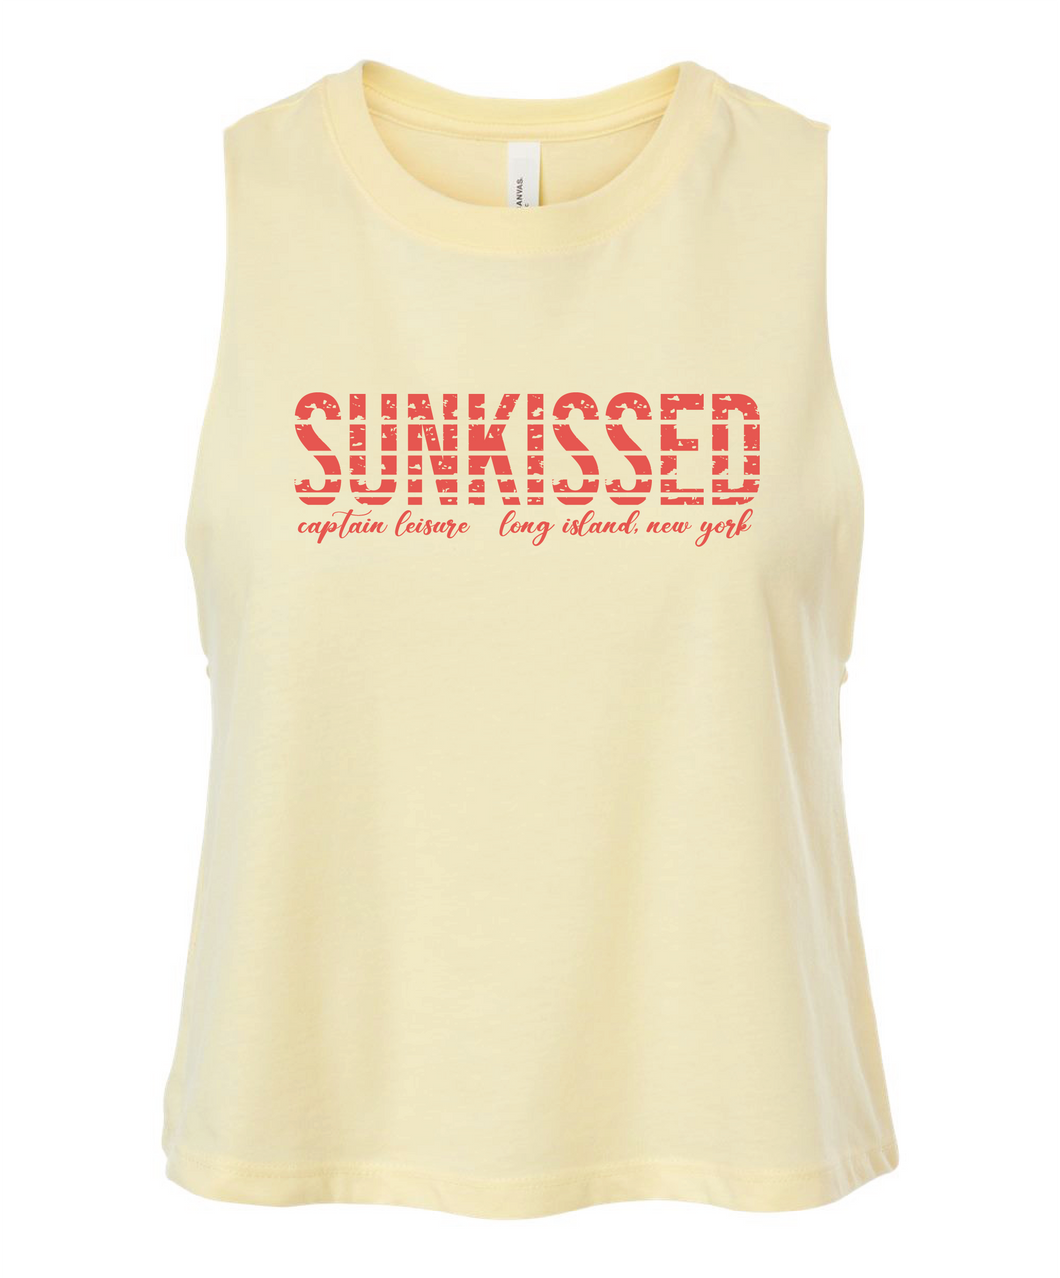 SALE: Sunkissed Cropped Racerback Tank - Pale Yellow